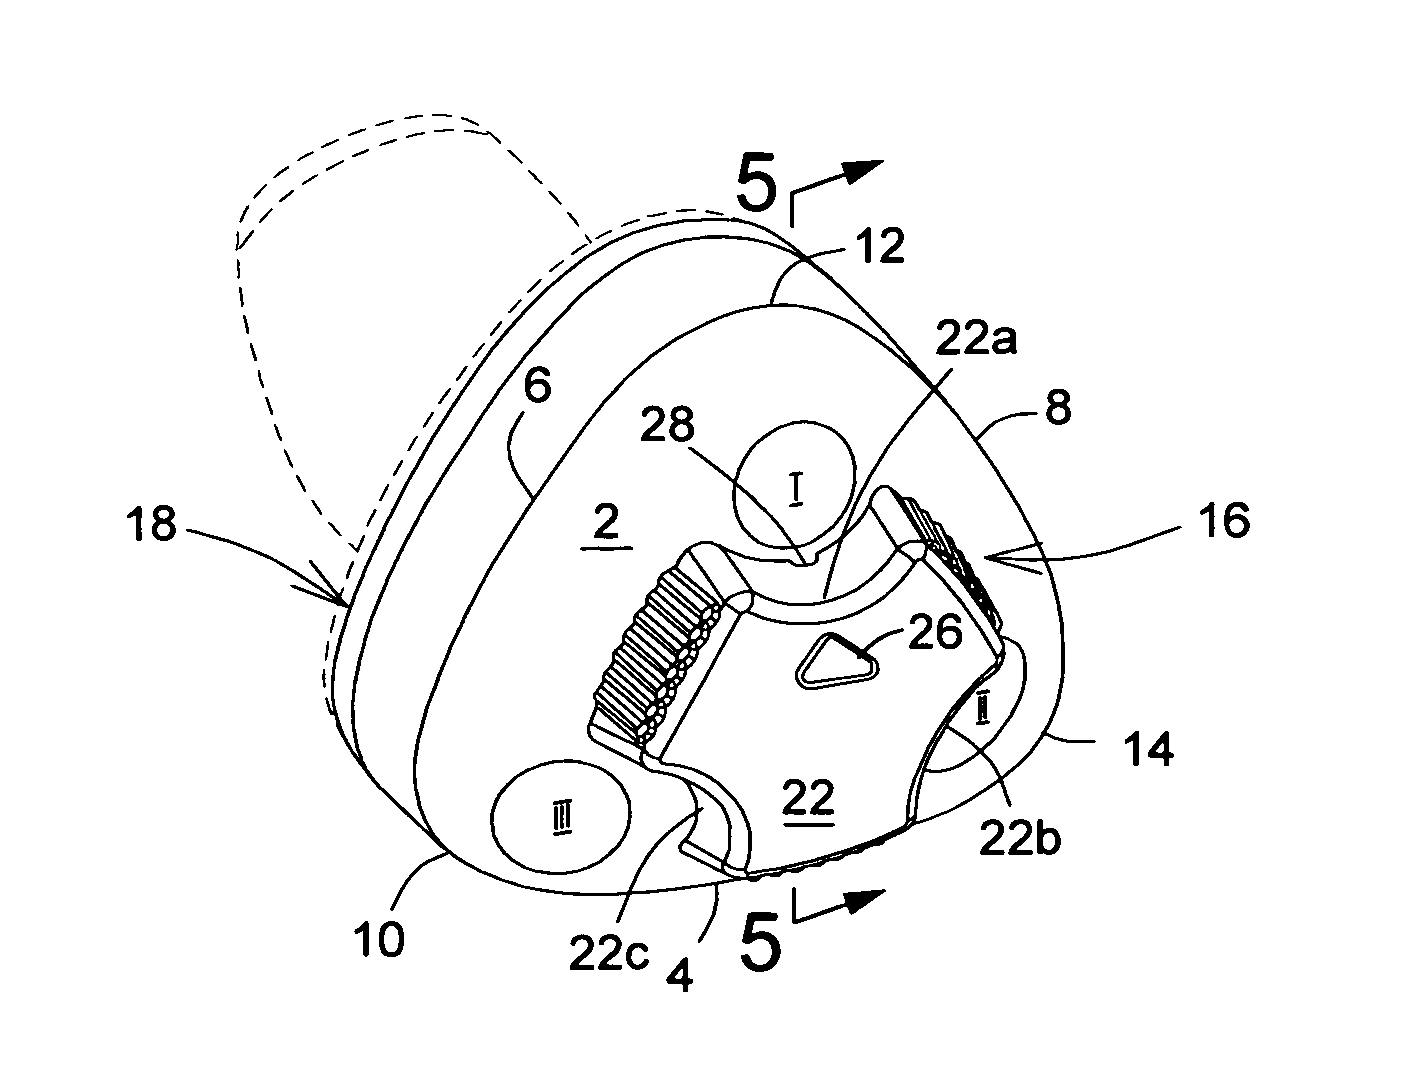 In-ear device with selectable frequency response